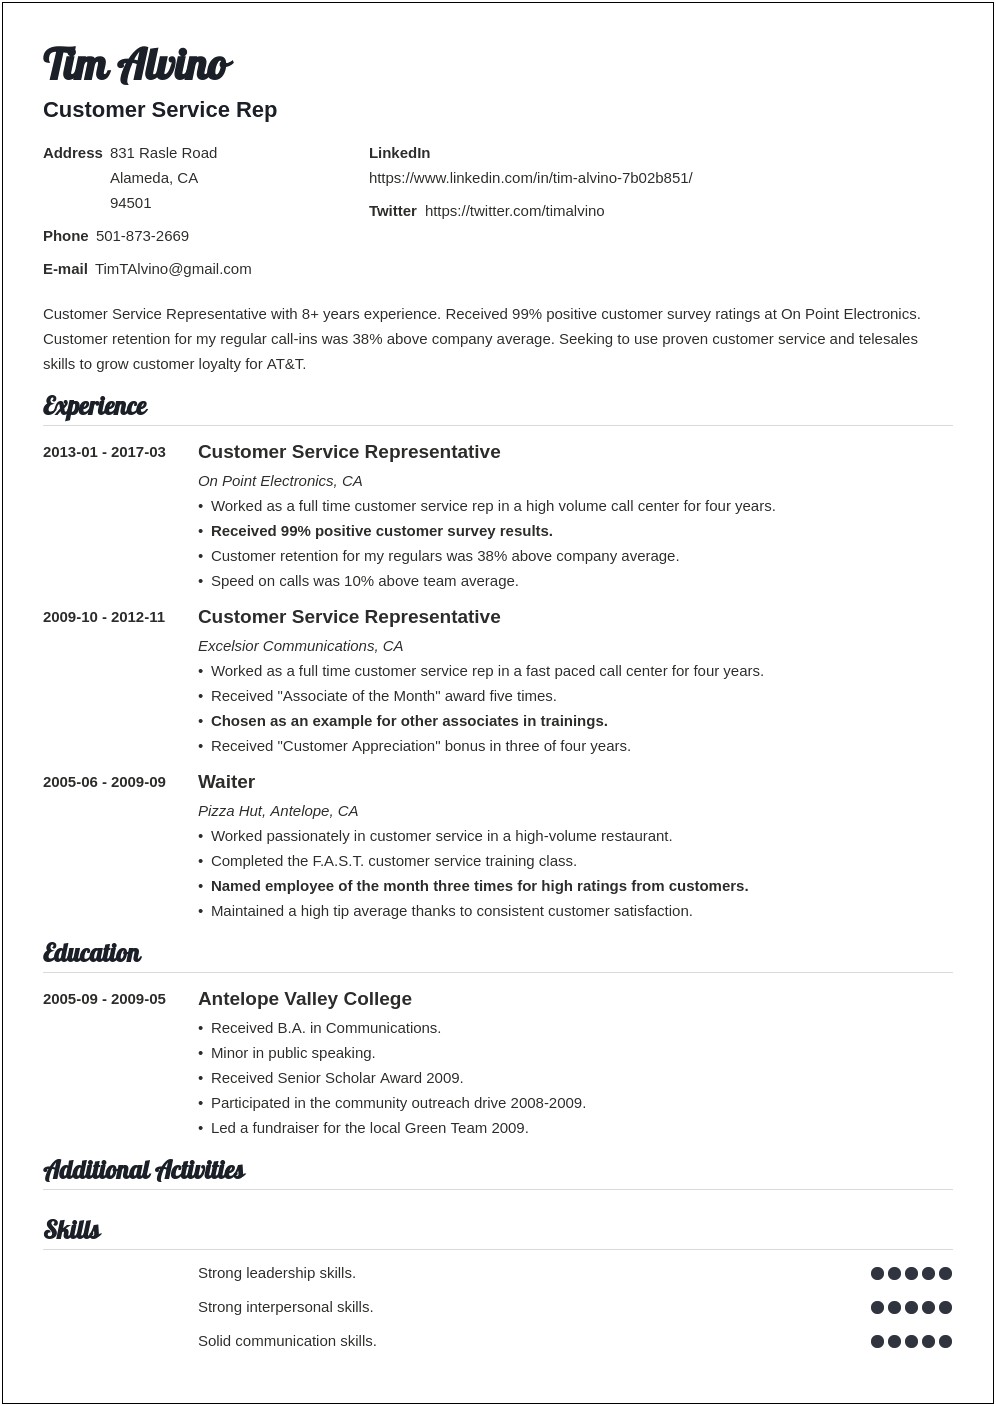 Show Me A Sample Resume For Customer Service